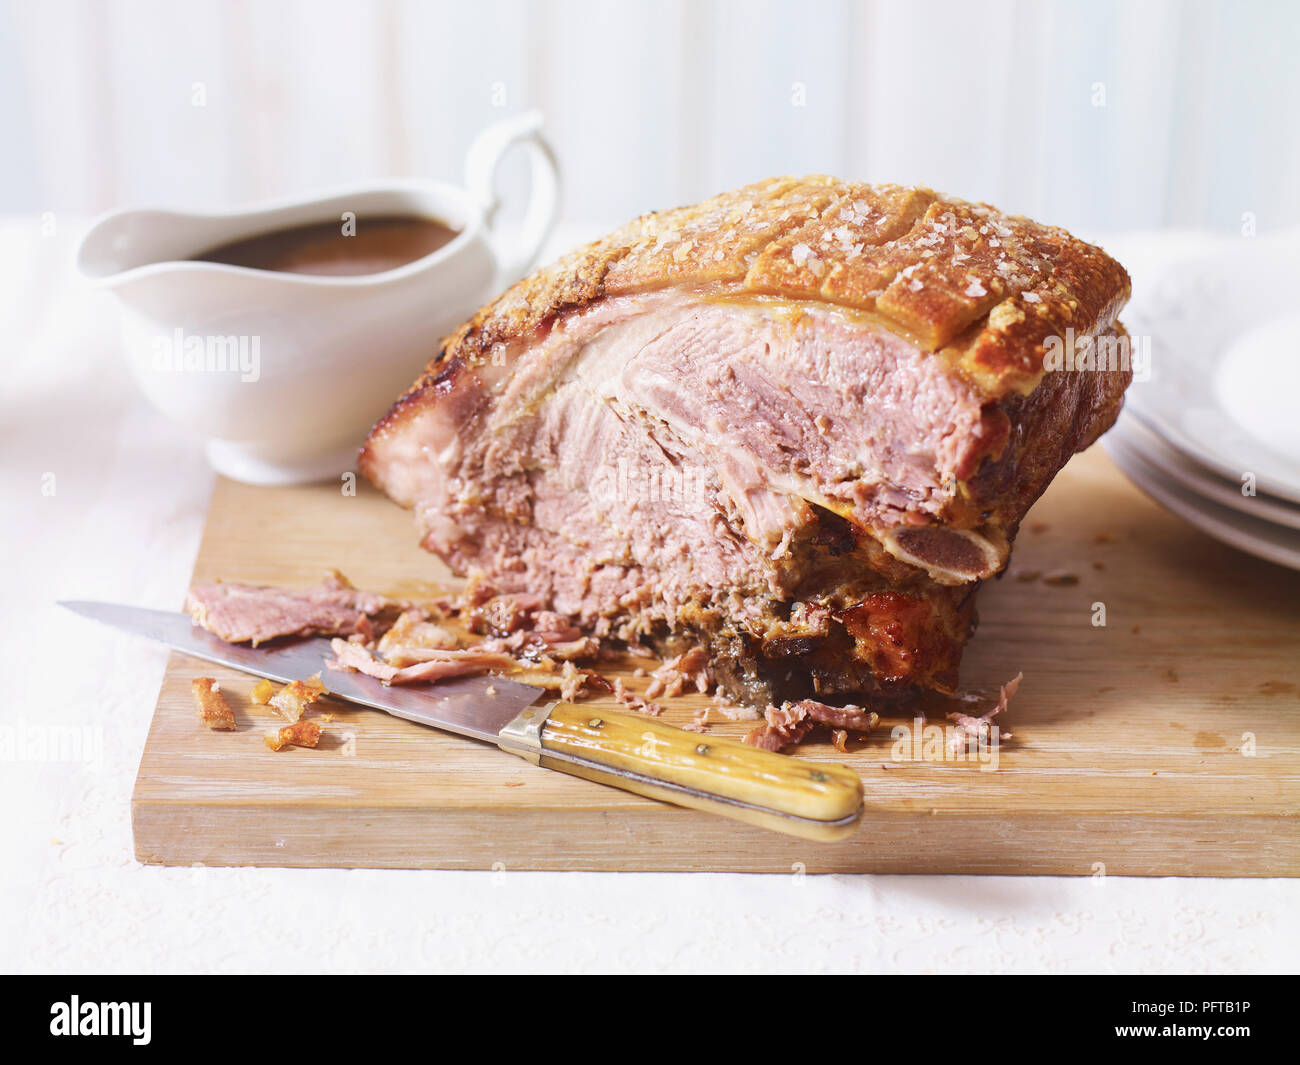 Slow-cooked pork shoulder and gravy Stock Photo